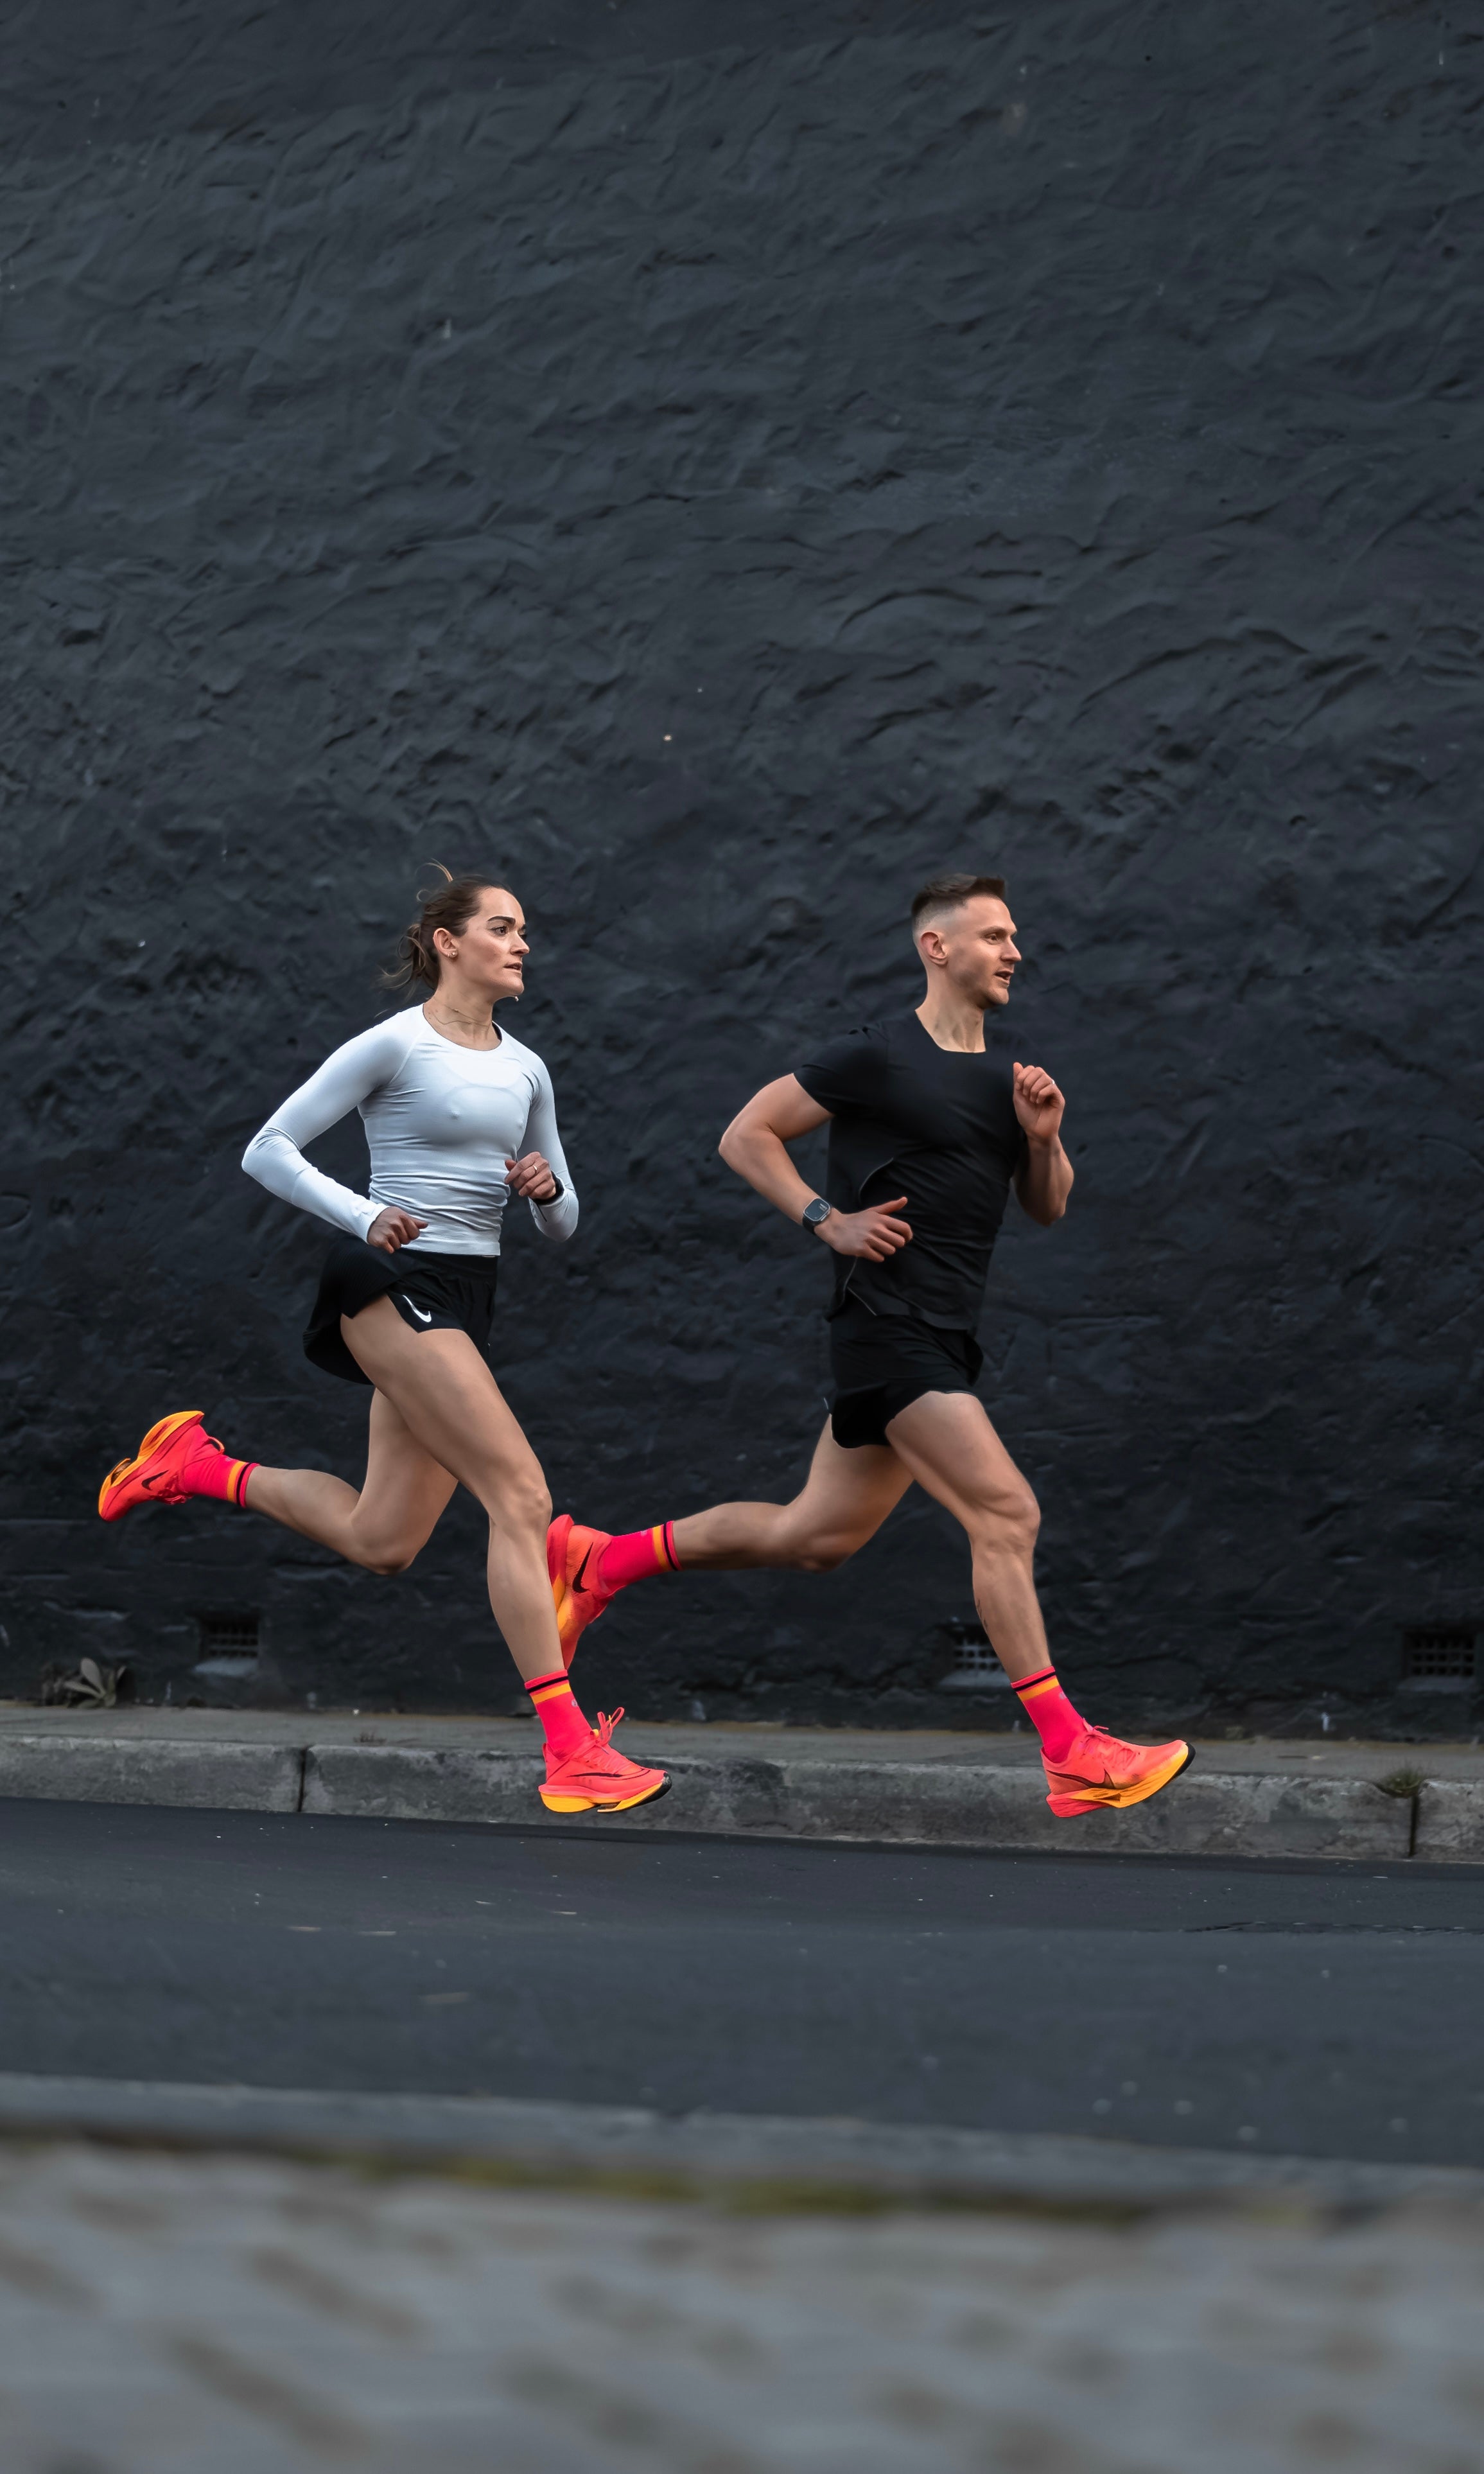 SHYU - running socks designed for you and your race day super shoe